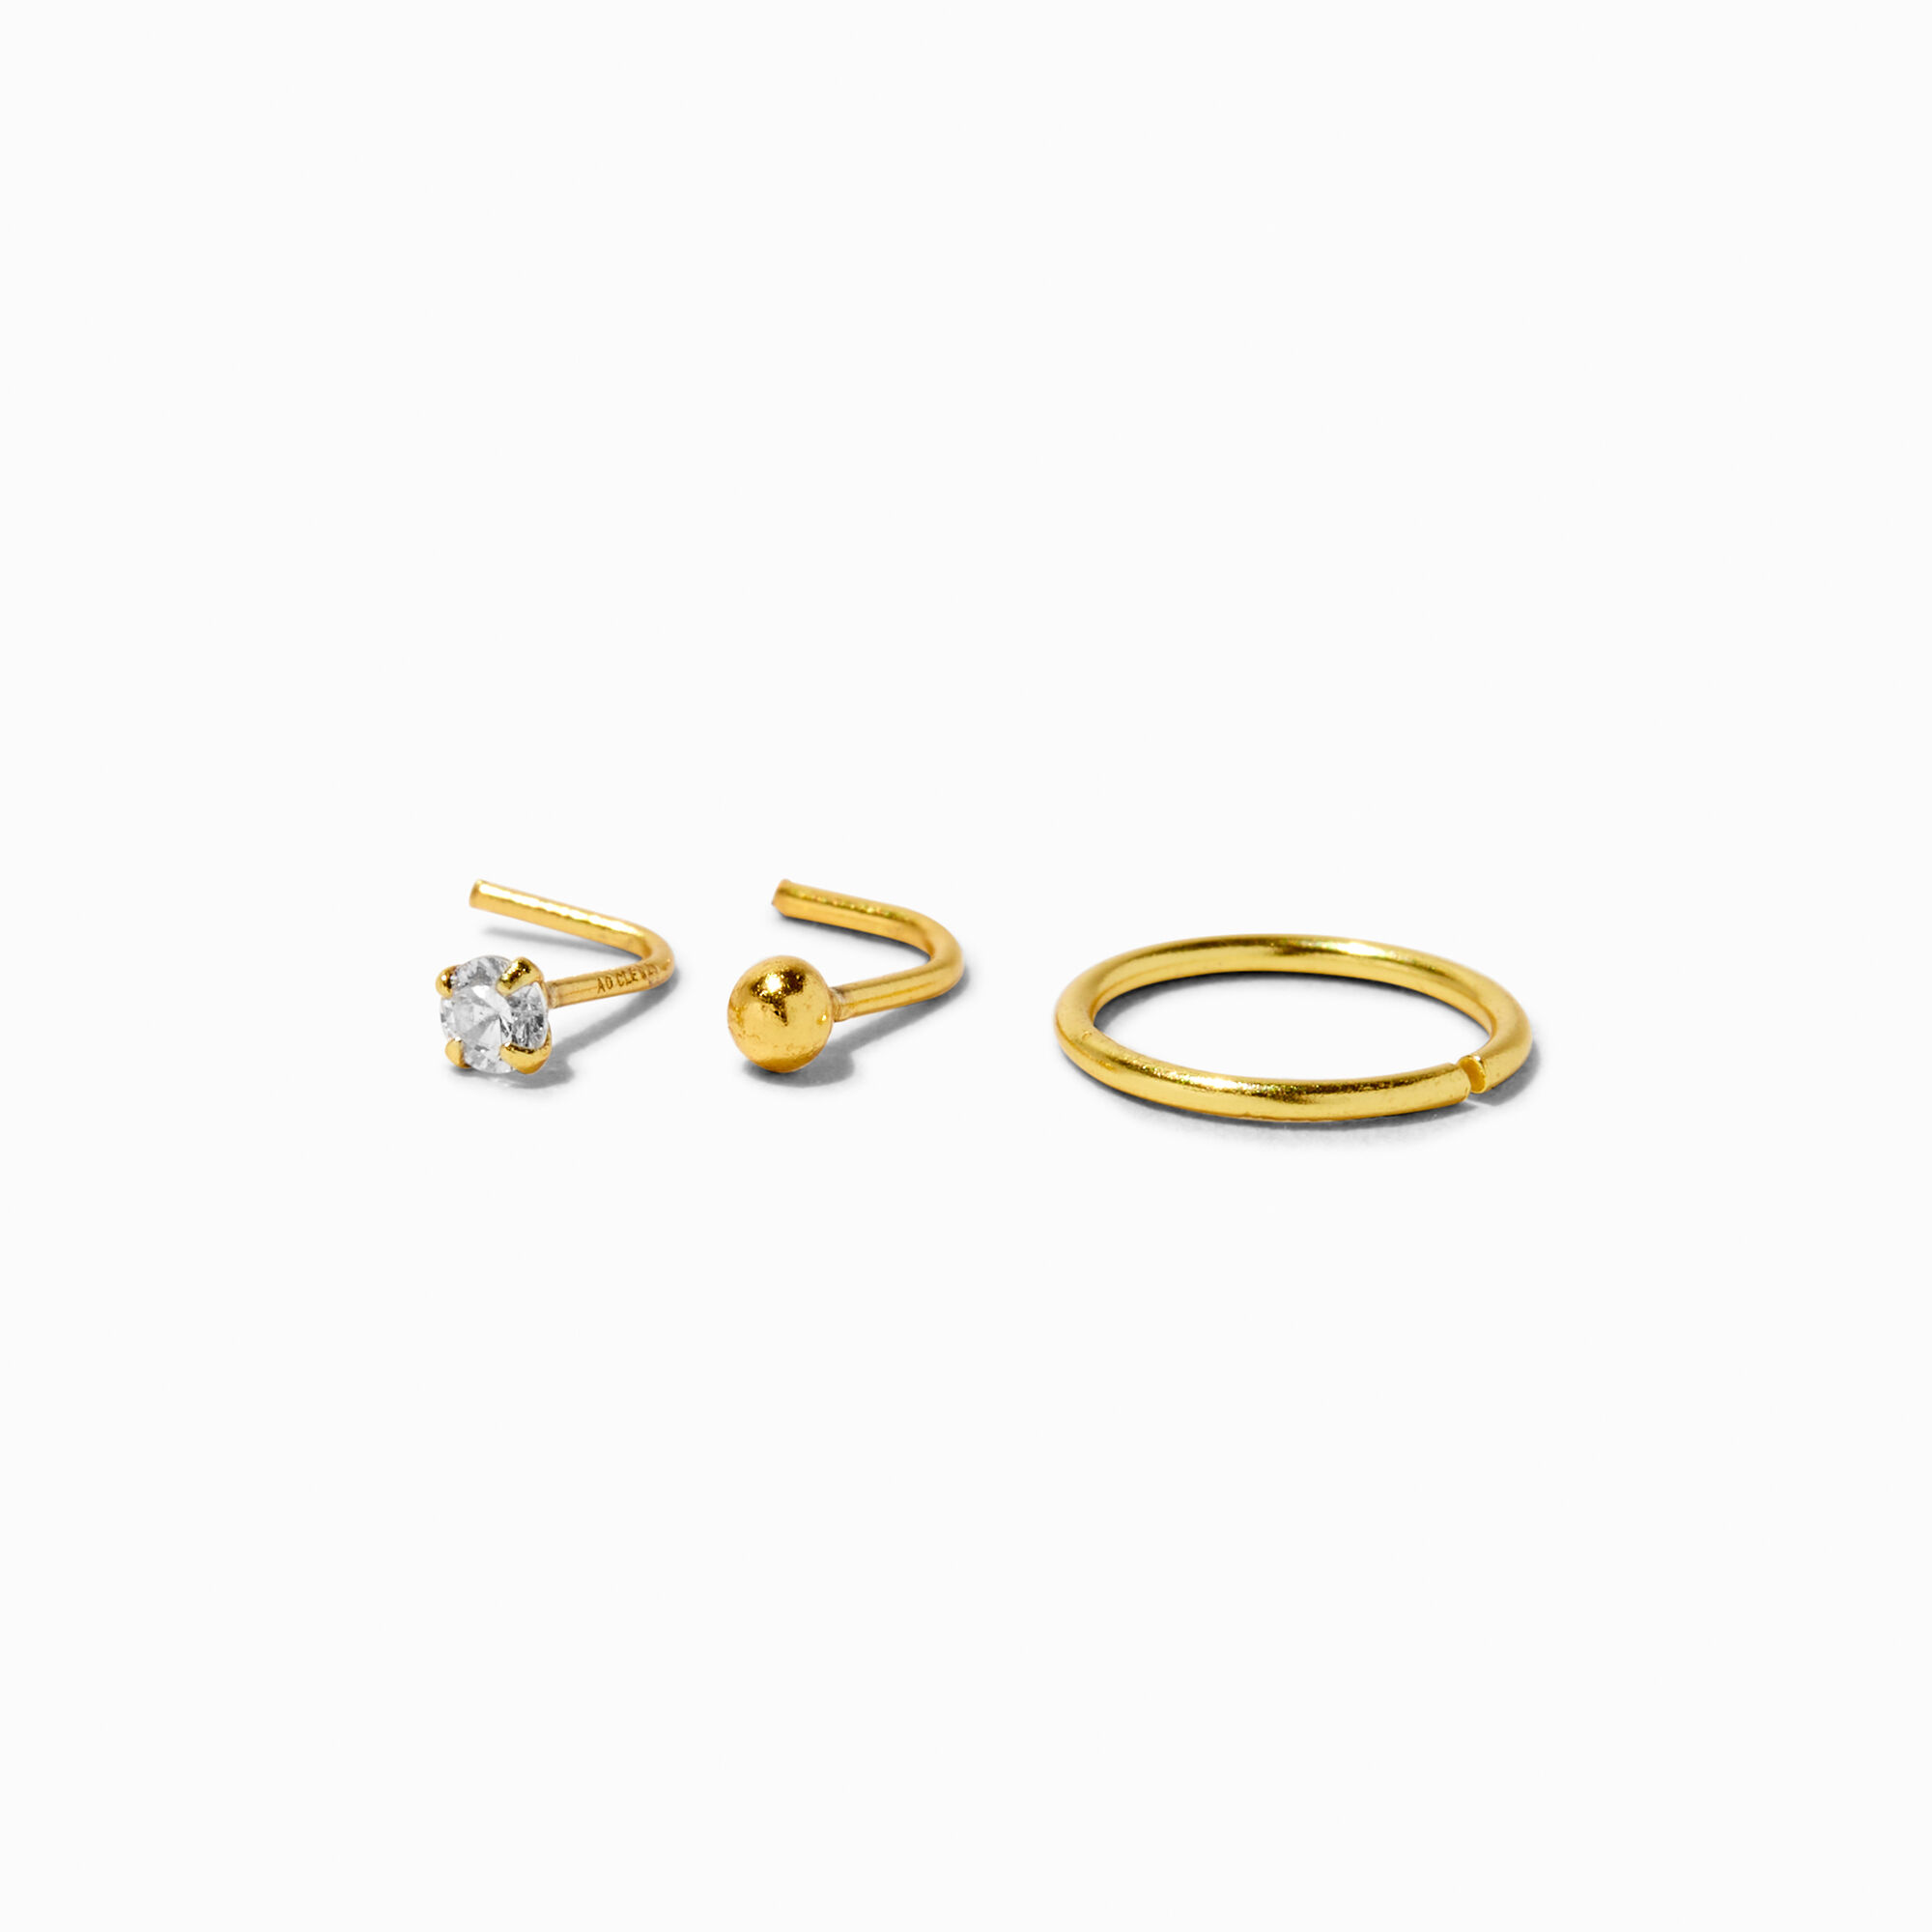 View Claires GoldColored Cubic Zirconia 22G Stud Hoop Nose Rings 3 Pack Silver information